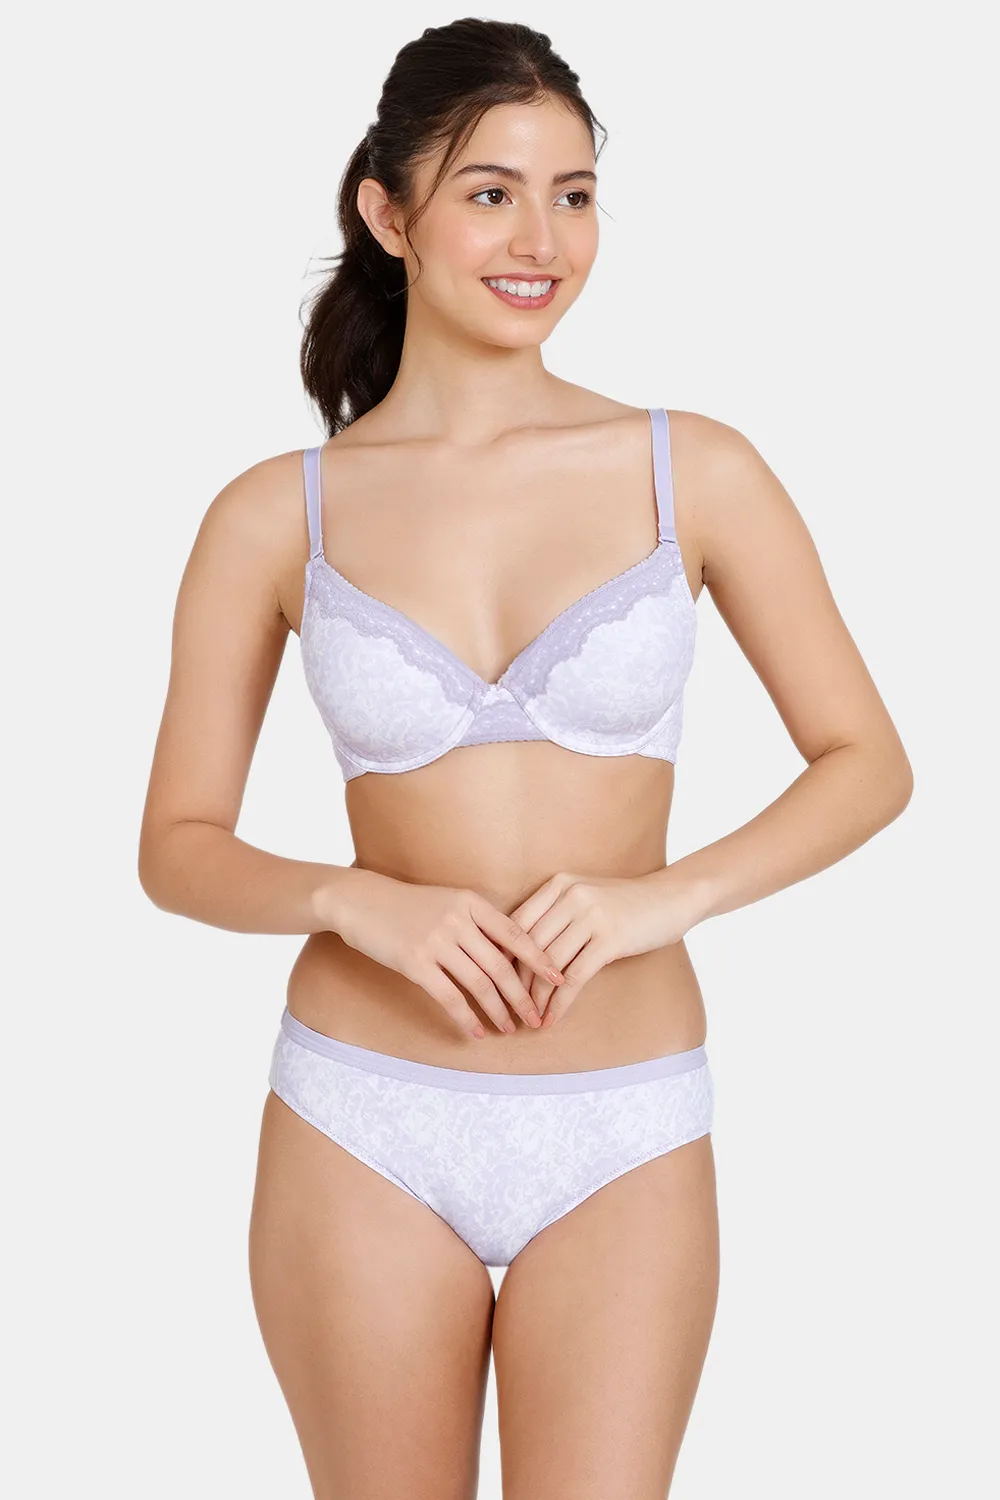 Mio Amore Lingerie - Buy Mio Amore Bras & Panties Online in India